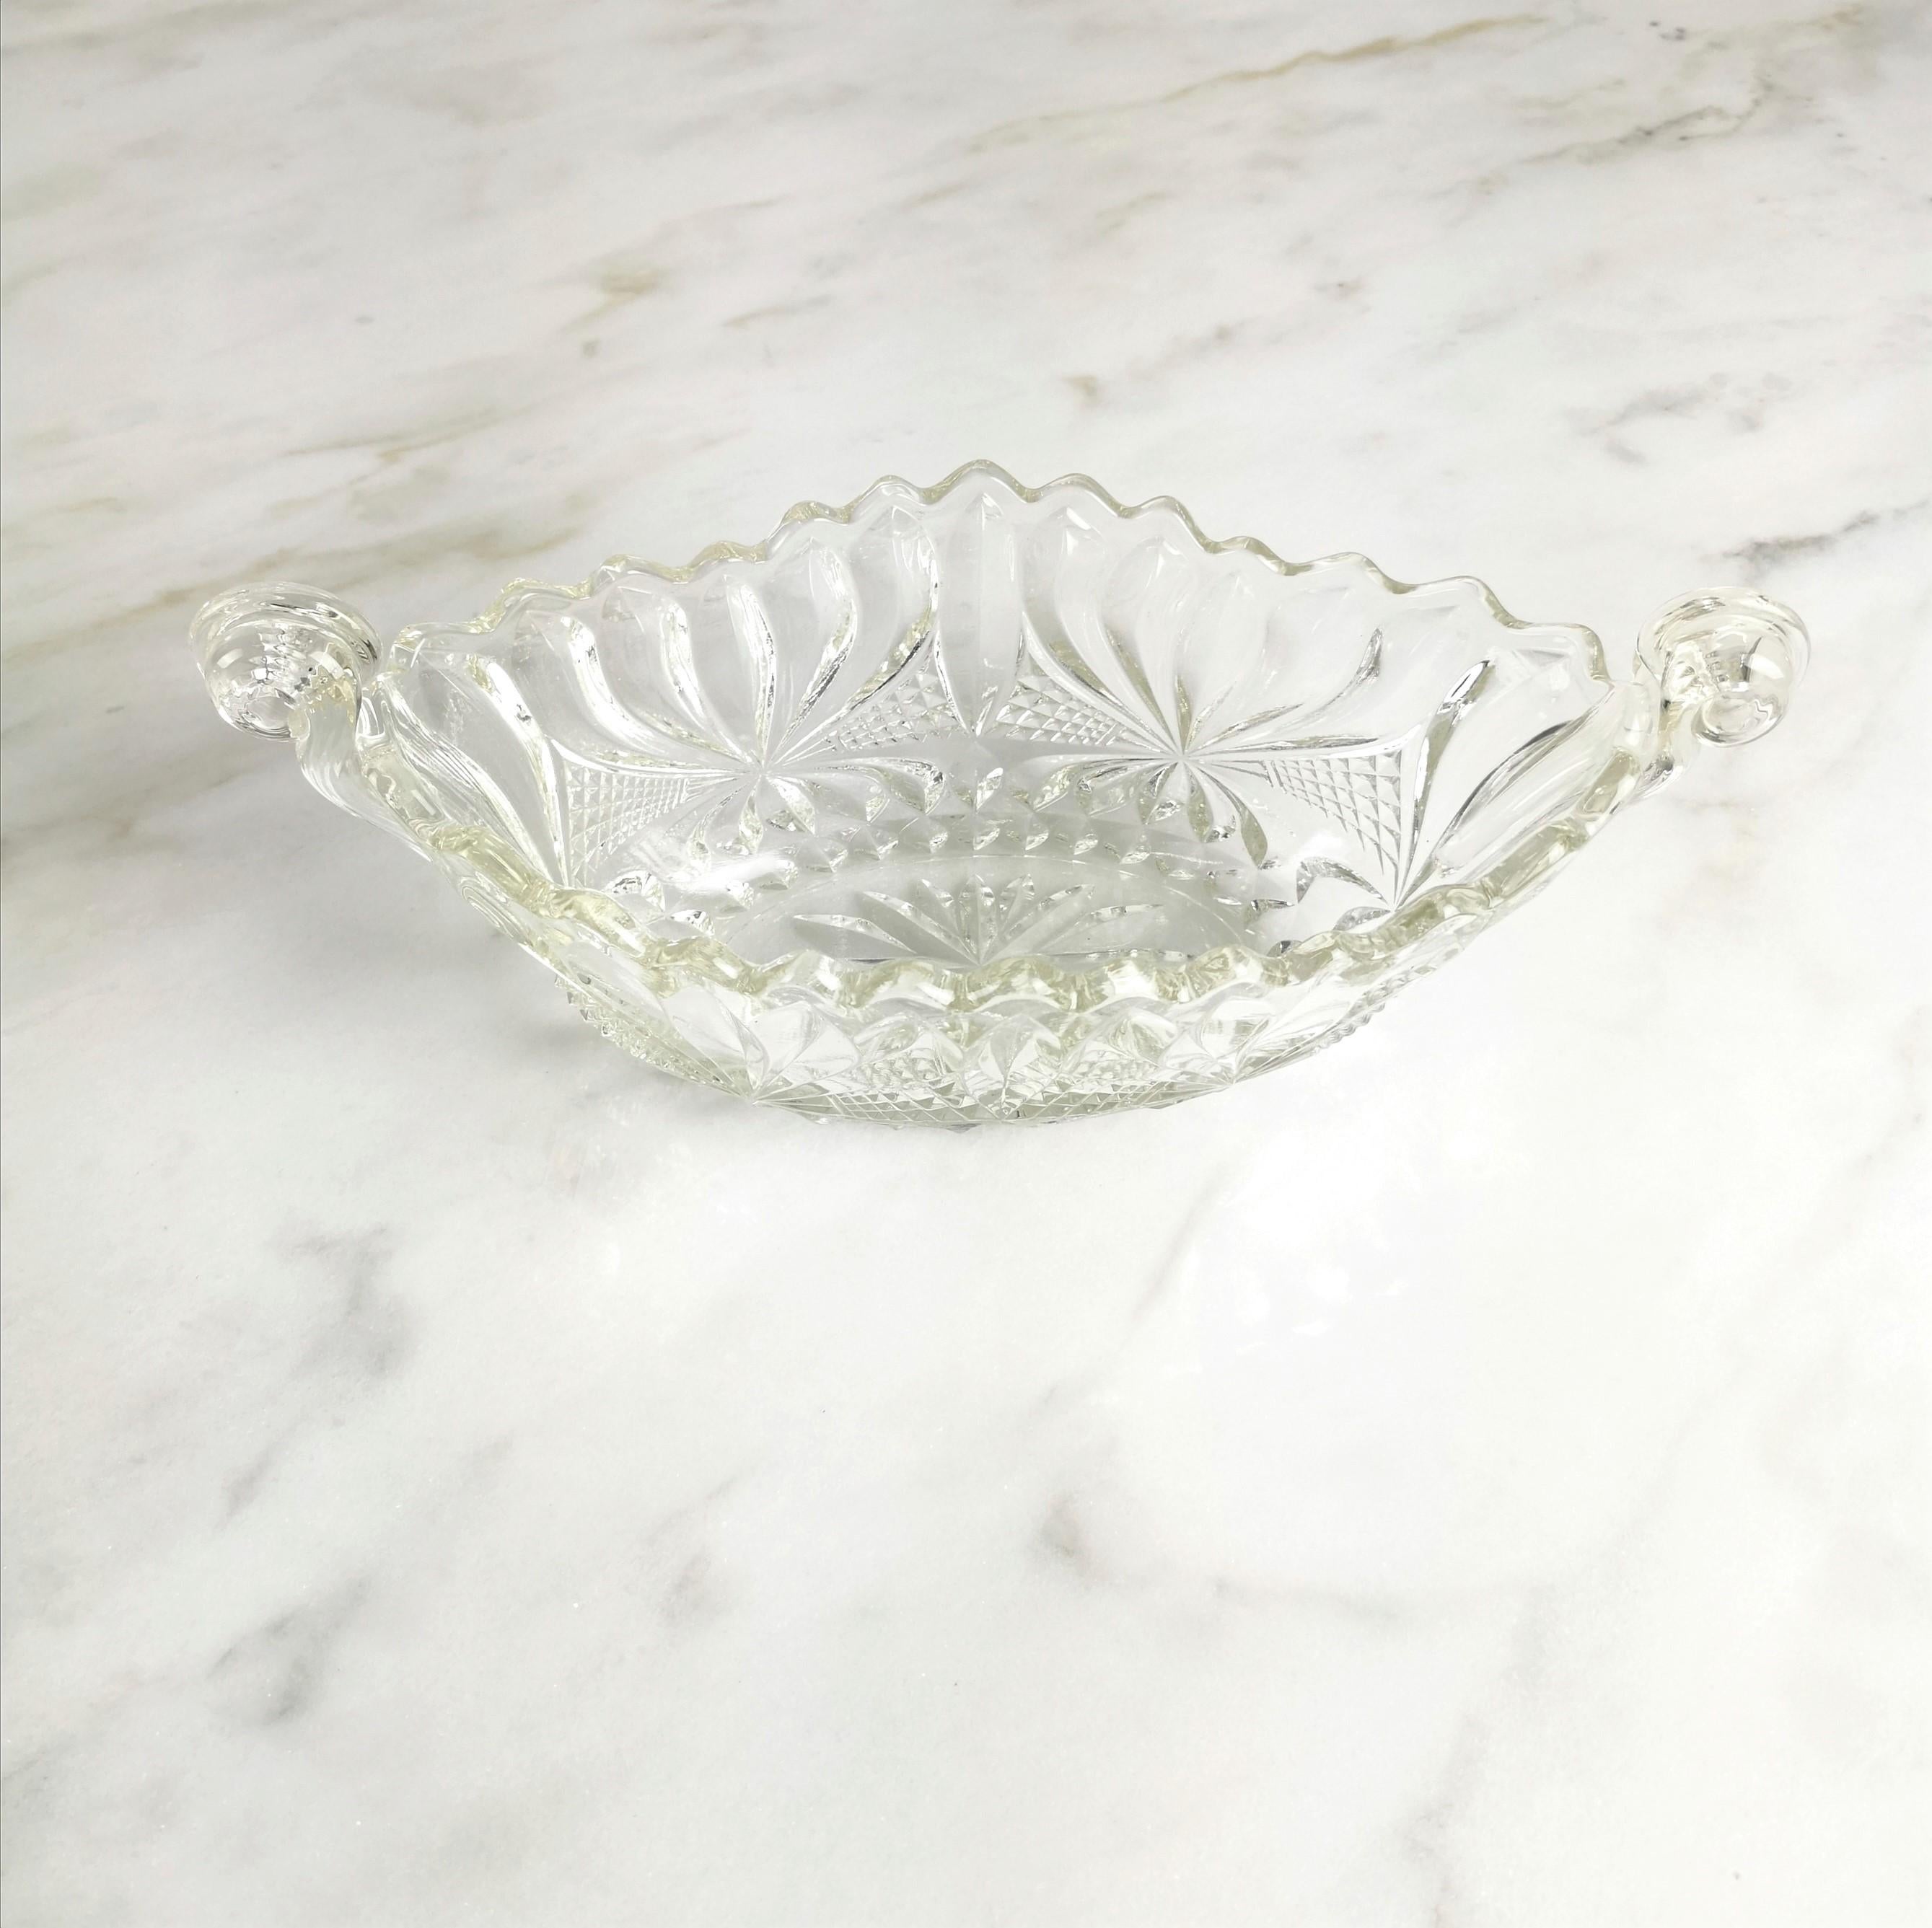 Mid-Century Modern Centerpiece Carved Crystal Glass Transparent Mid-Century Italian Design, 1950s For Sale